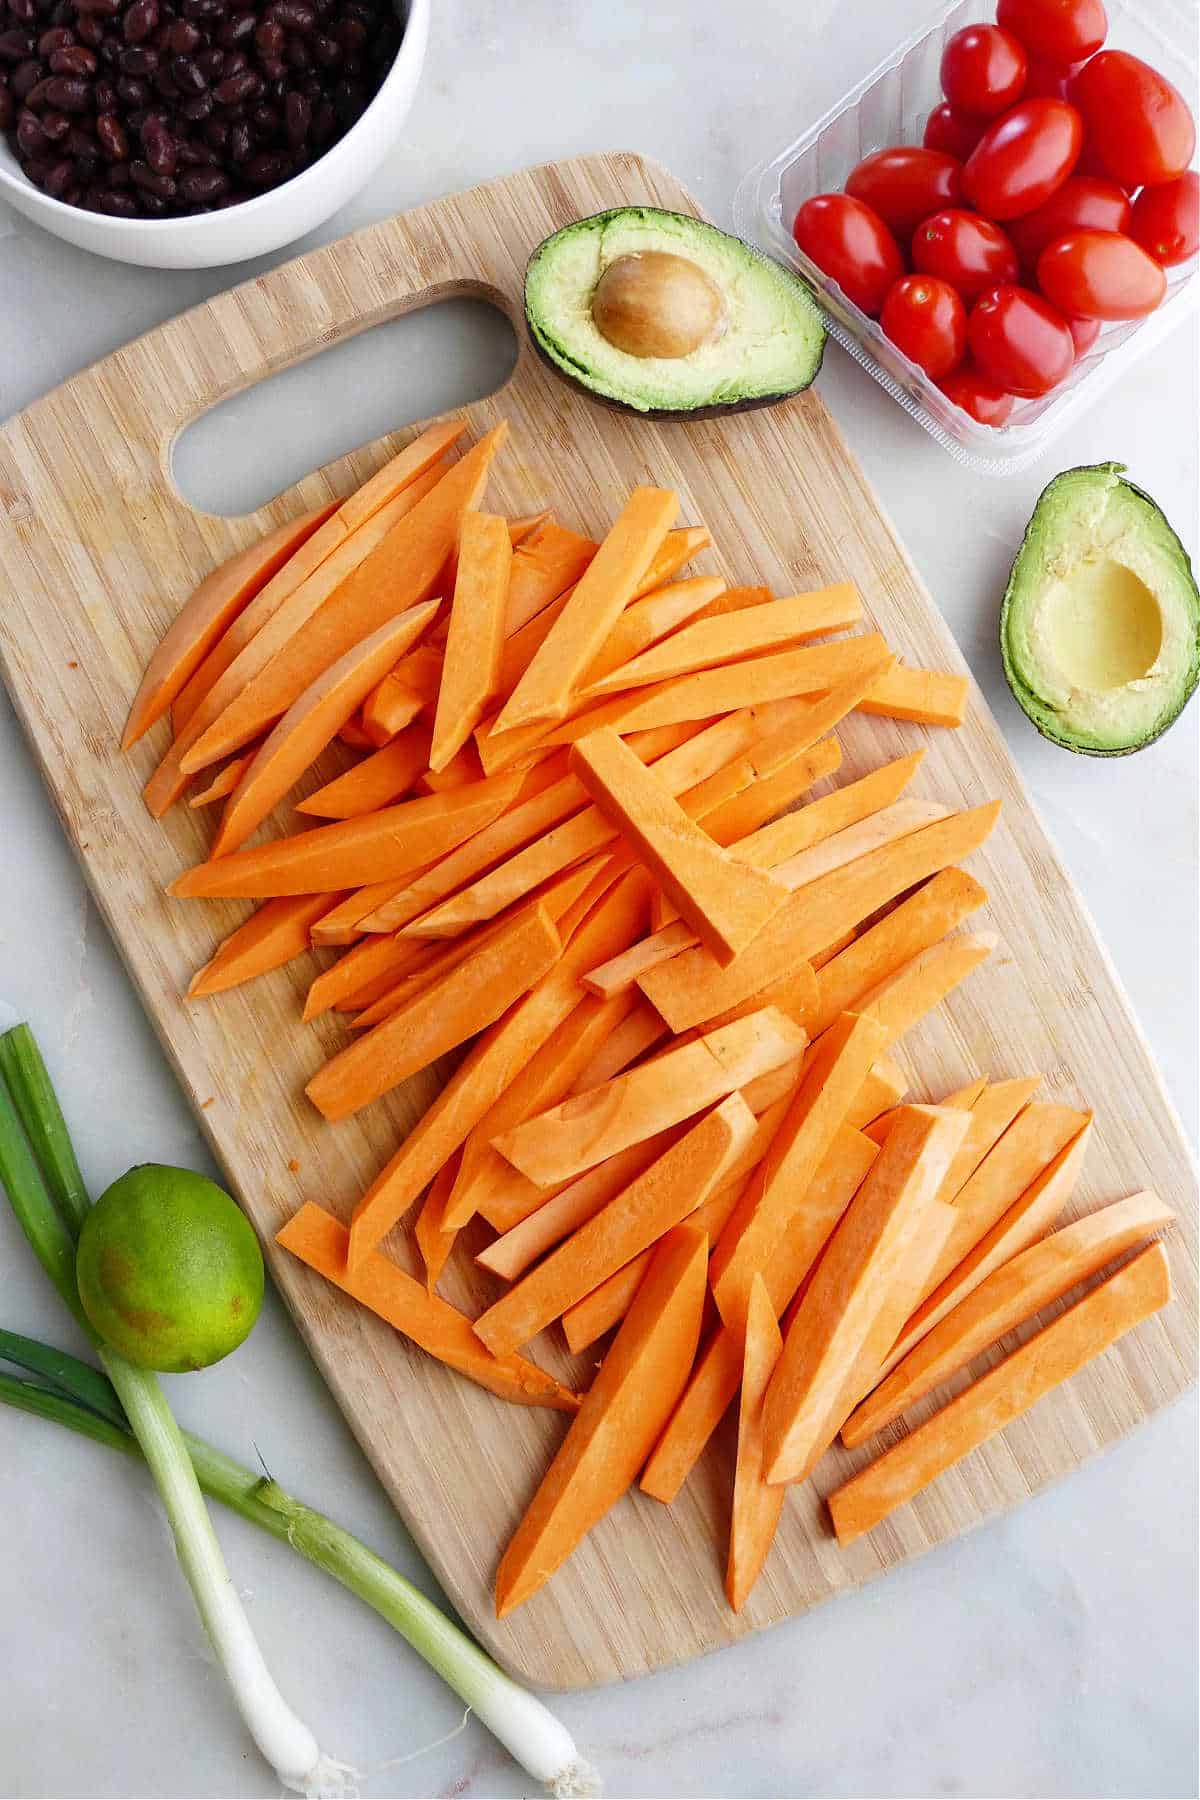 sweet potato sliced into fries on a cutting board next to avocado, tomatoes, lime, and onions